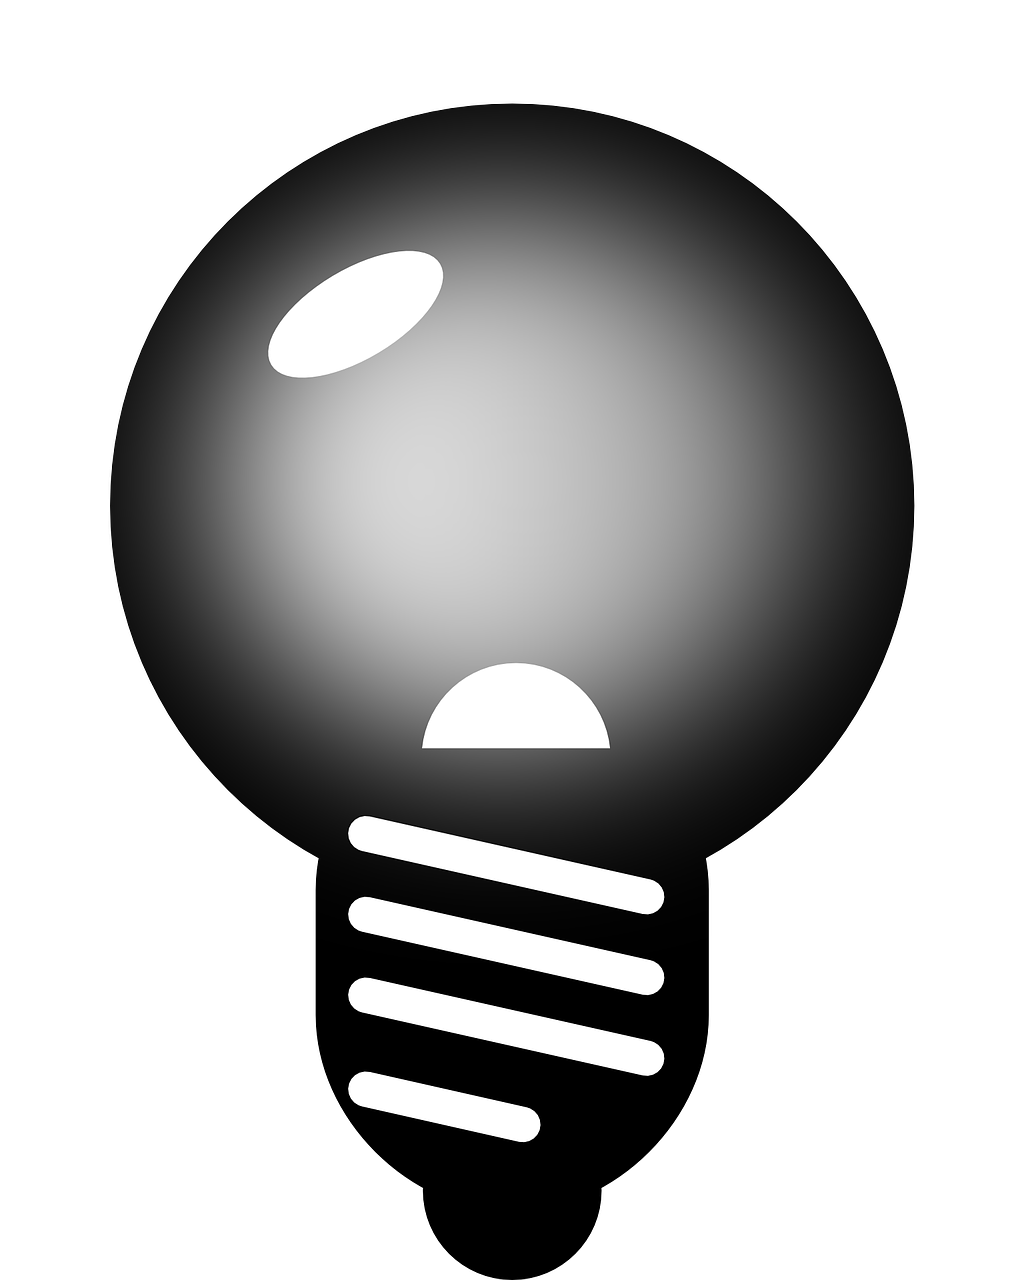 Lightbulbelectric Bulbpowerenergy Free Image From